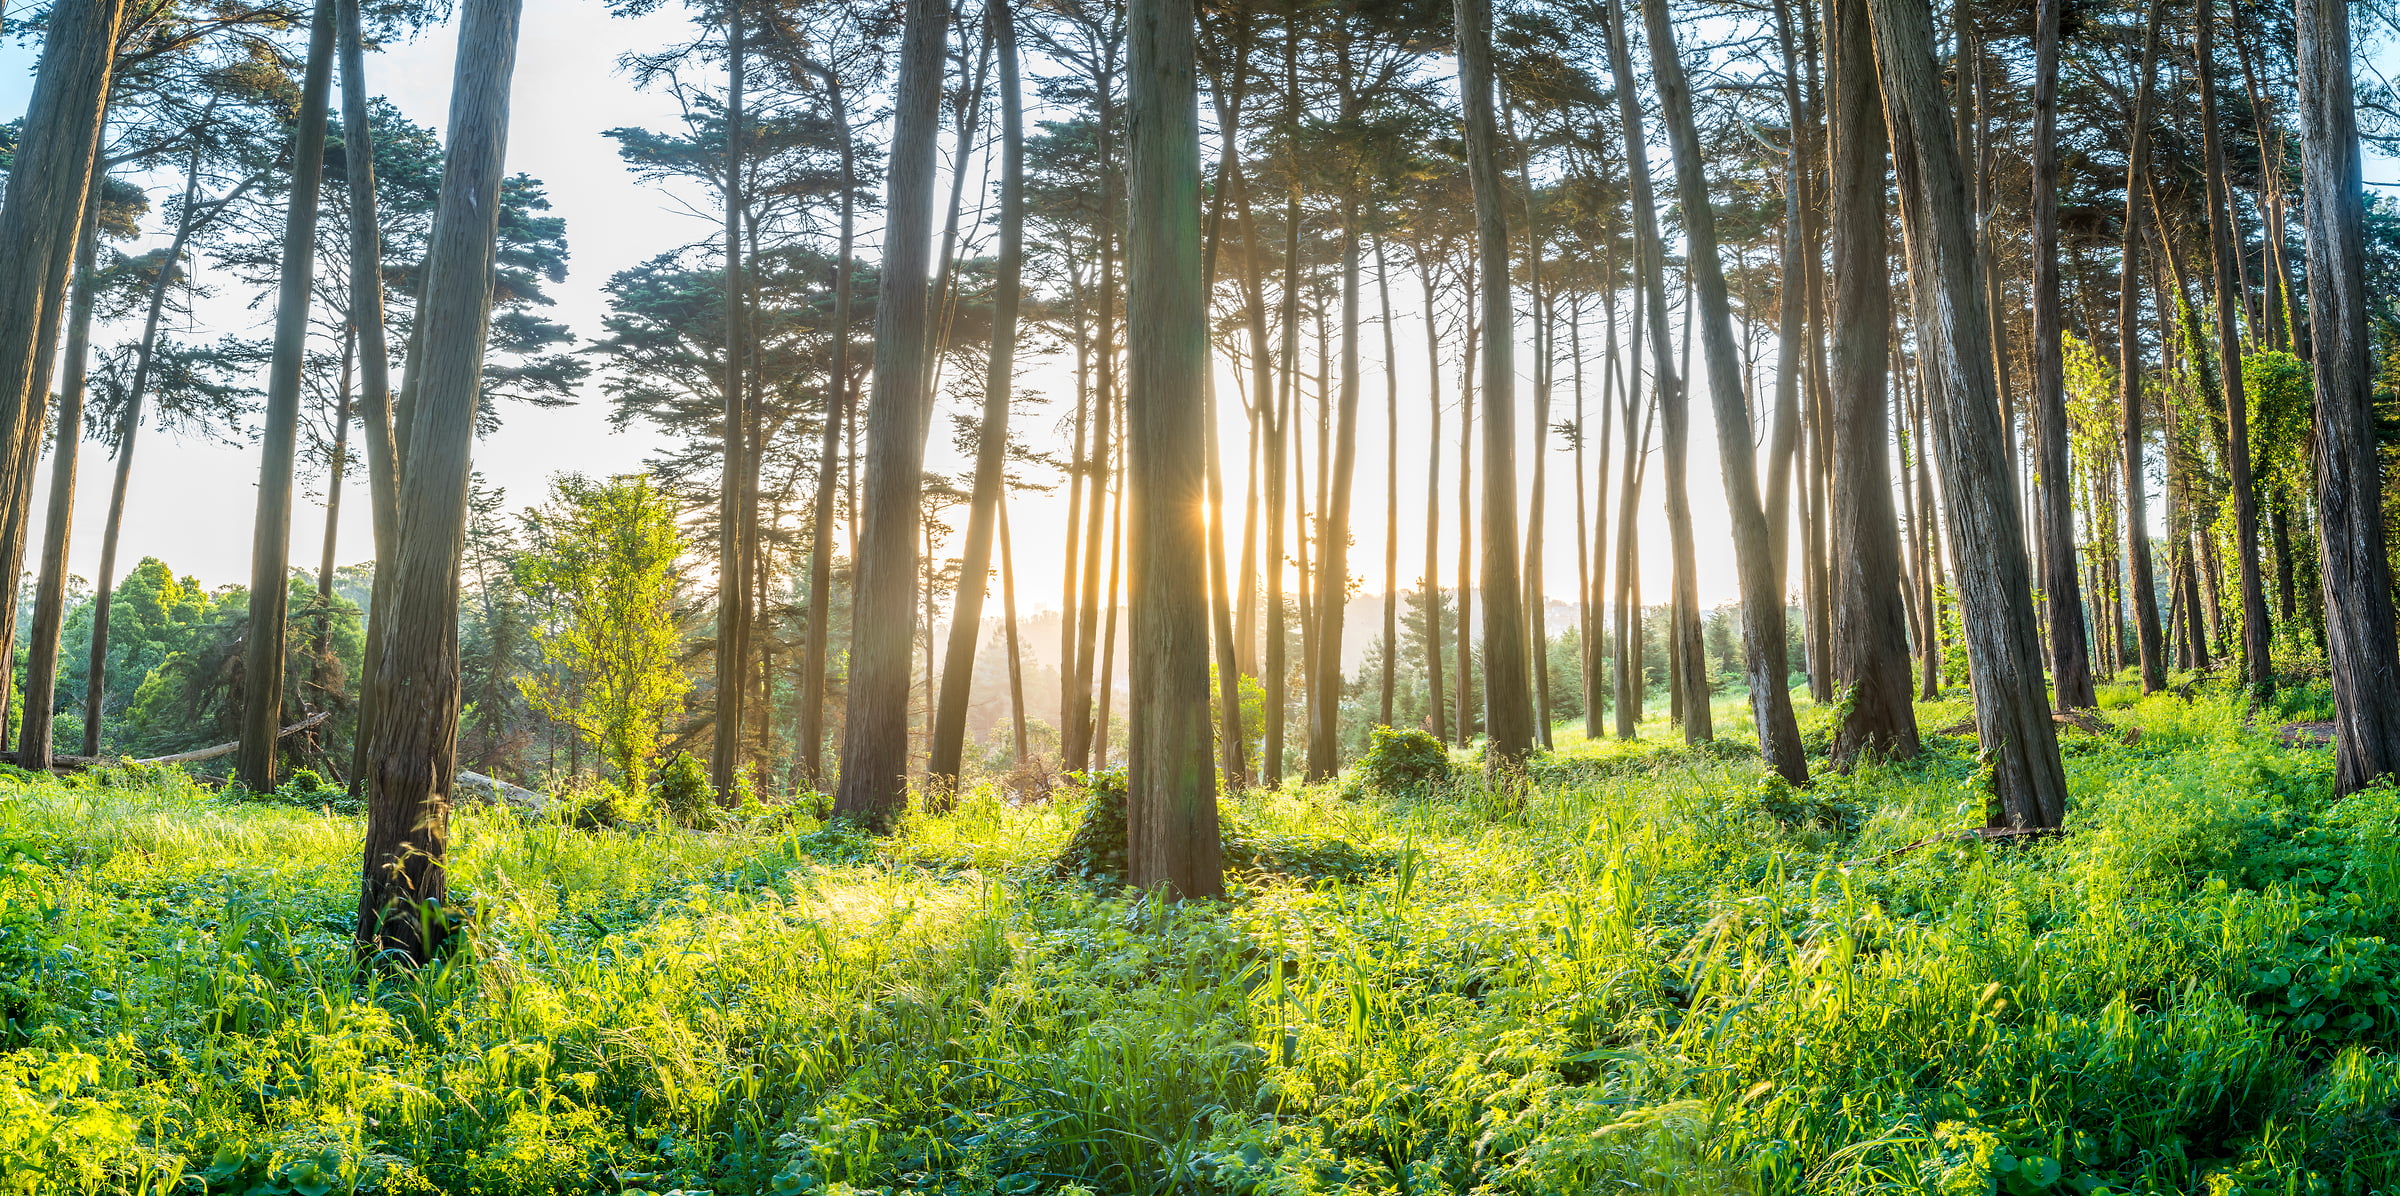 285 megapixels! A very high resolution, large-format VAST photo print of trees in the Presidio of San Francisco at sunrise; fine art nature photo created by Justin Katz in California